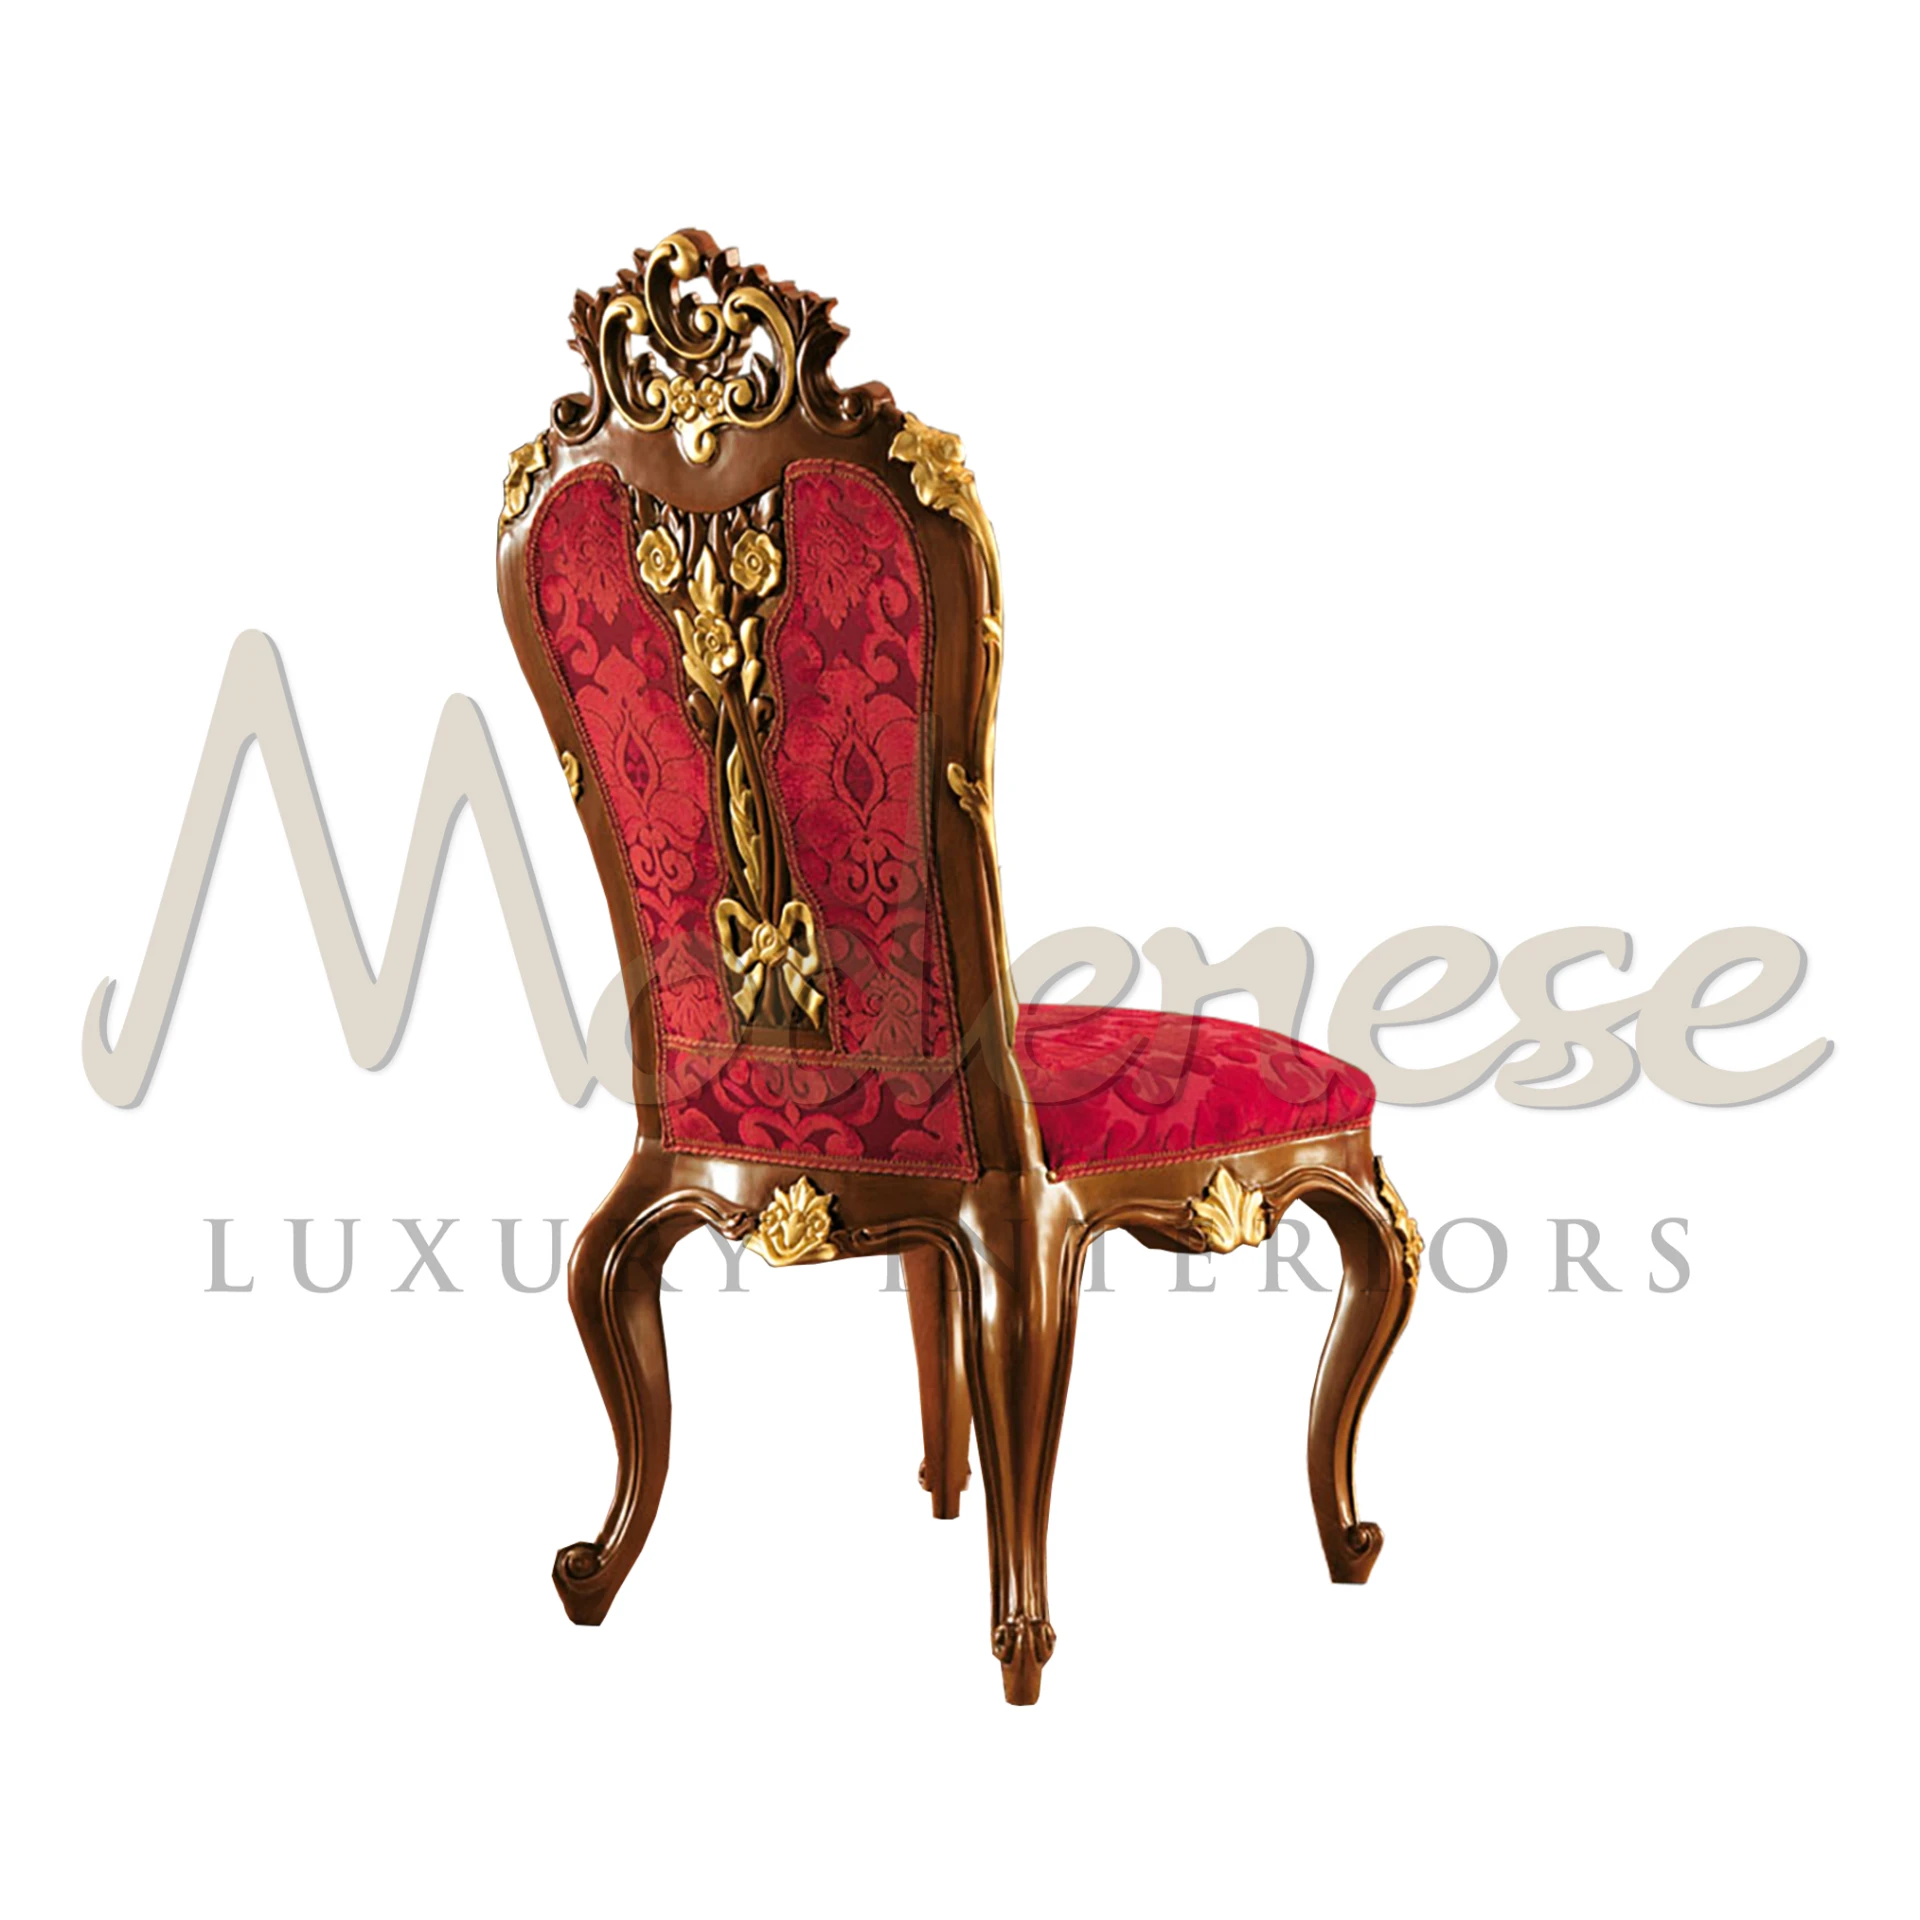 Modenese Furniture's specially designed chair features flamboyant upholstery and gold leaf carvings, a head-turner for any living space.